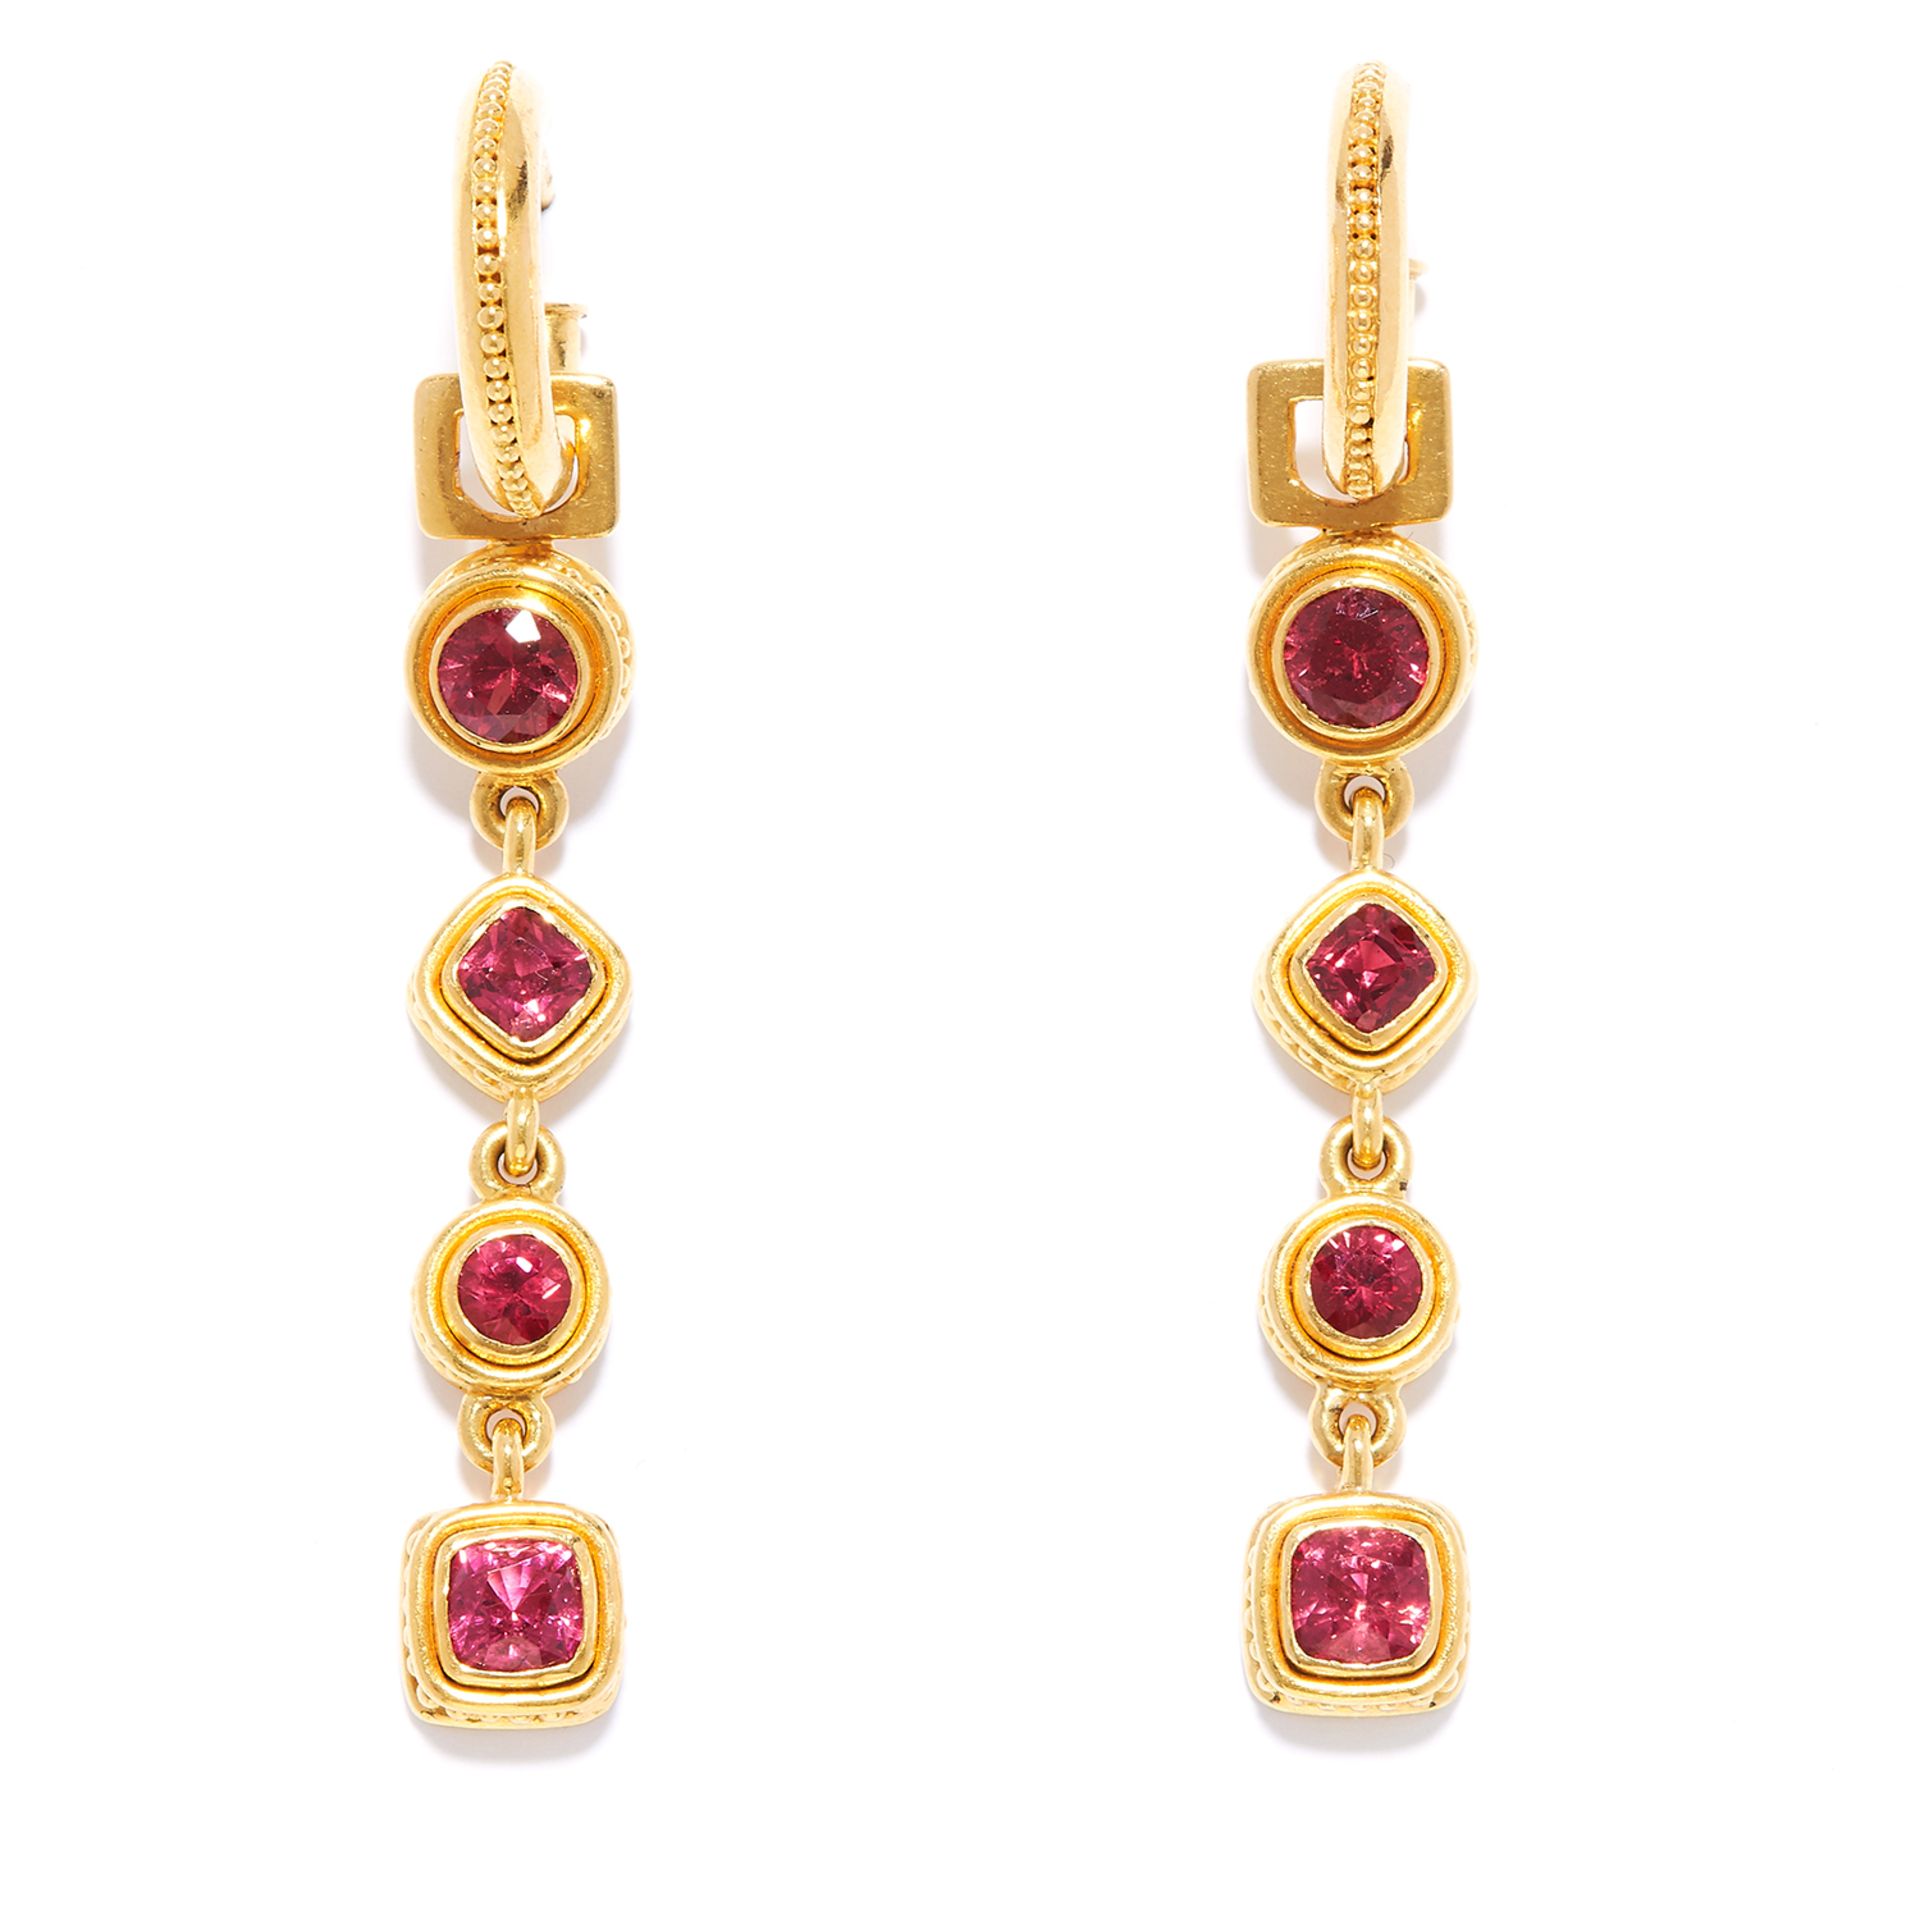 SPINEL DROP DAY AND NIGHT EARRINGS in 22ct yellow gold, each comprising a hoop suspending four